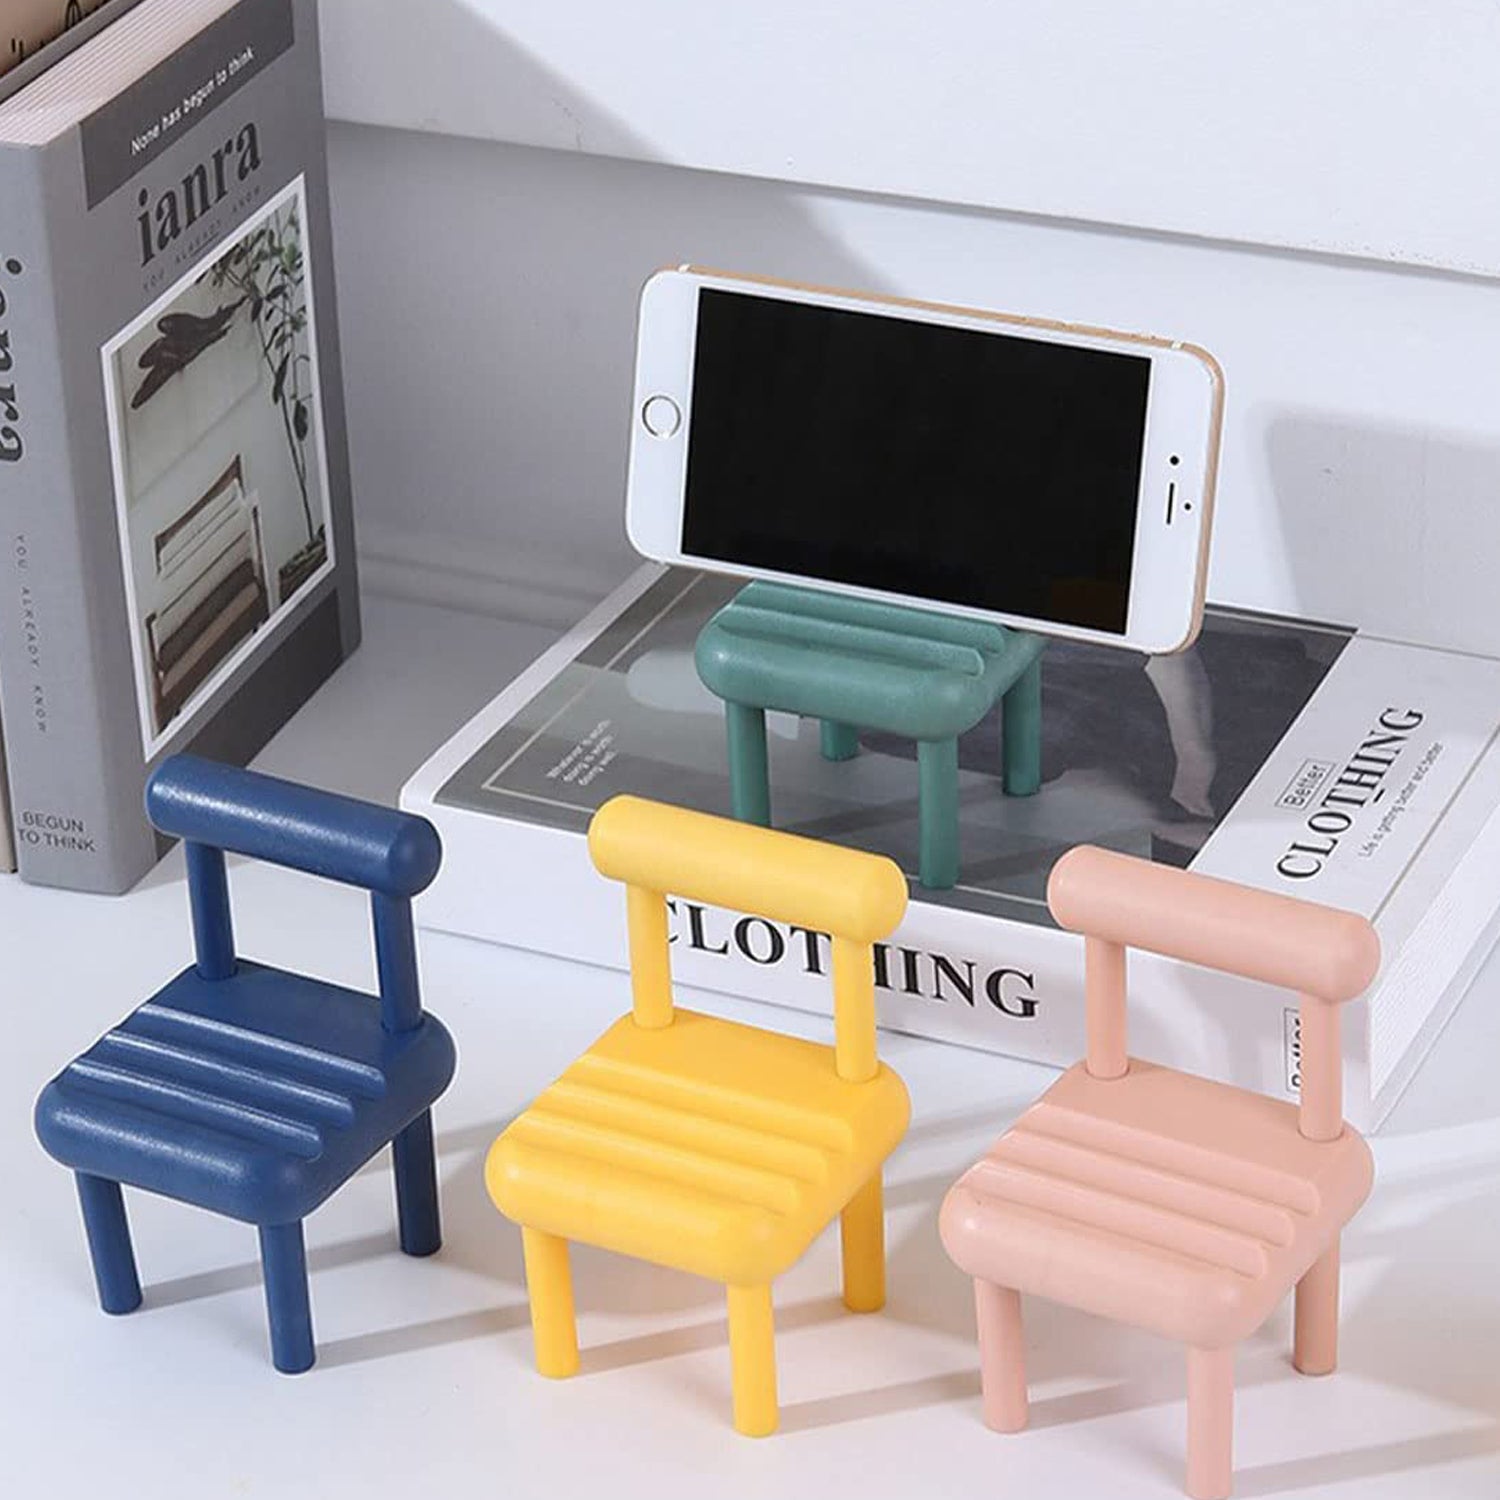 8854 Mobile Phone Holder, Mini Chair Cell Phone Stand, Portable Smartphone Dock, Cellphone Holder for Desktop Design Compatible with All Mobile Phones (1 Pc)